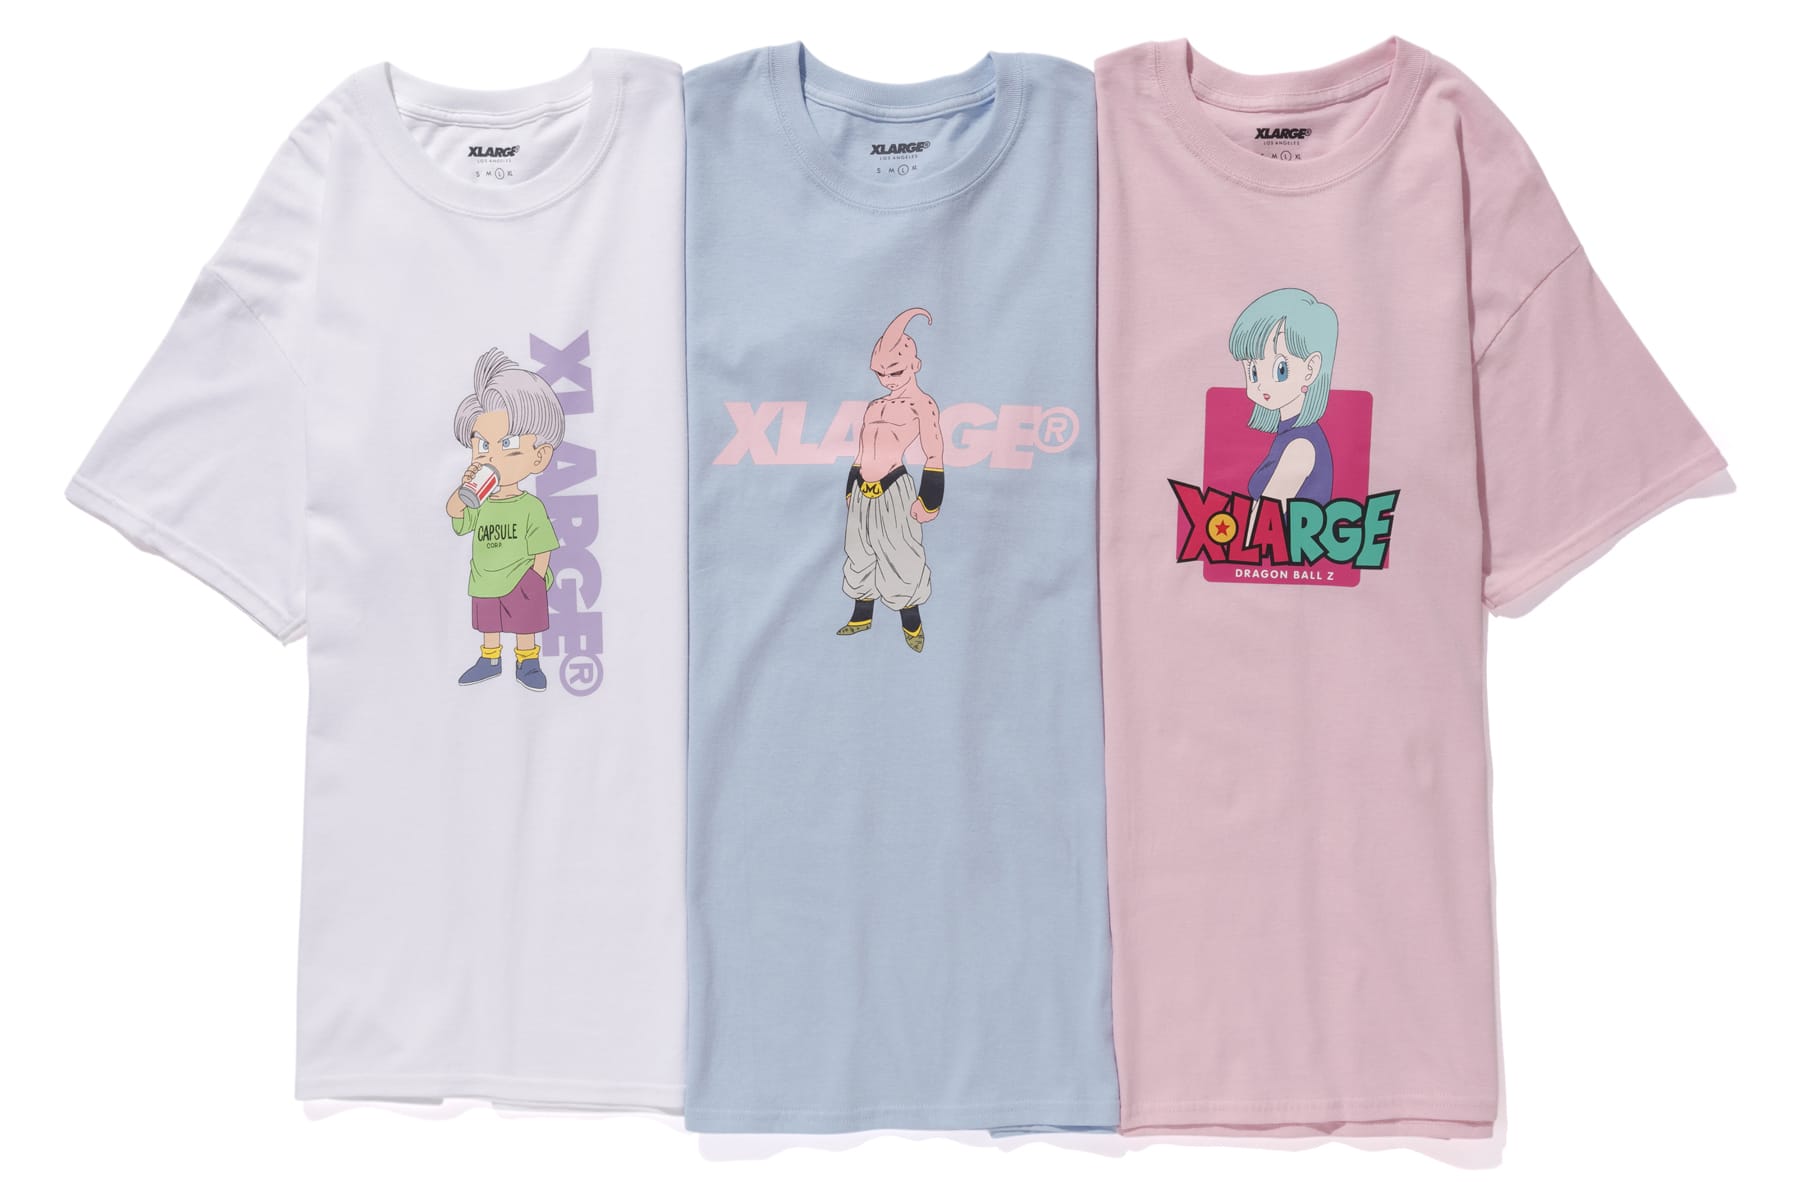 Dragon Ball Z' x XLARGE® Capsule Collection | HYPEBEAST